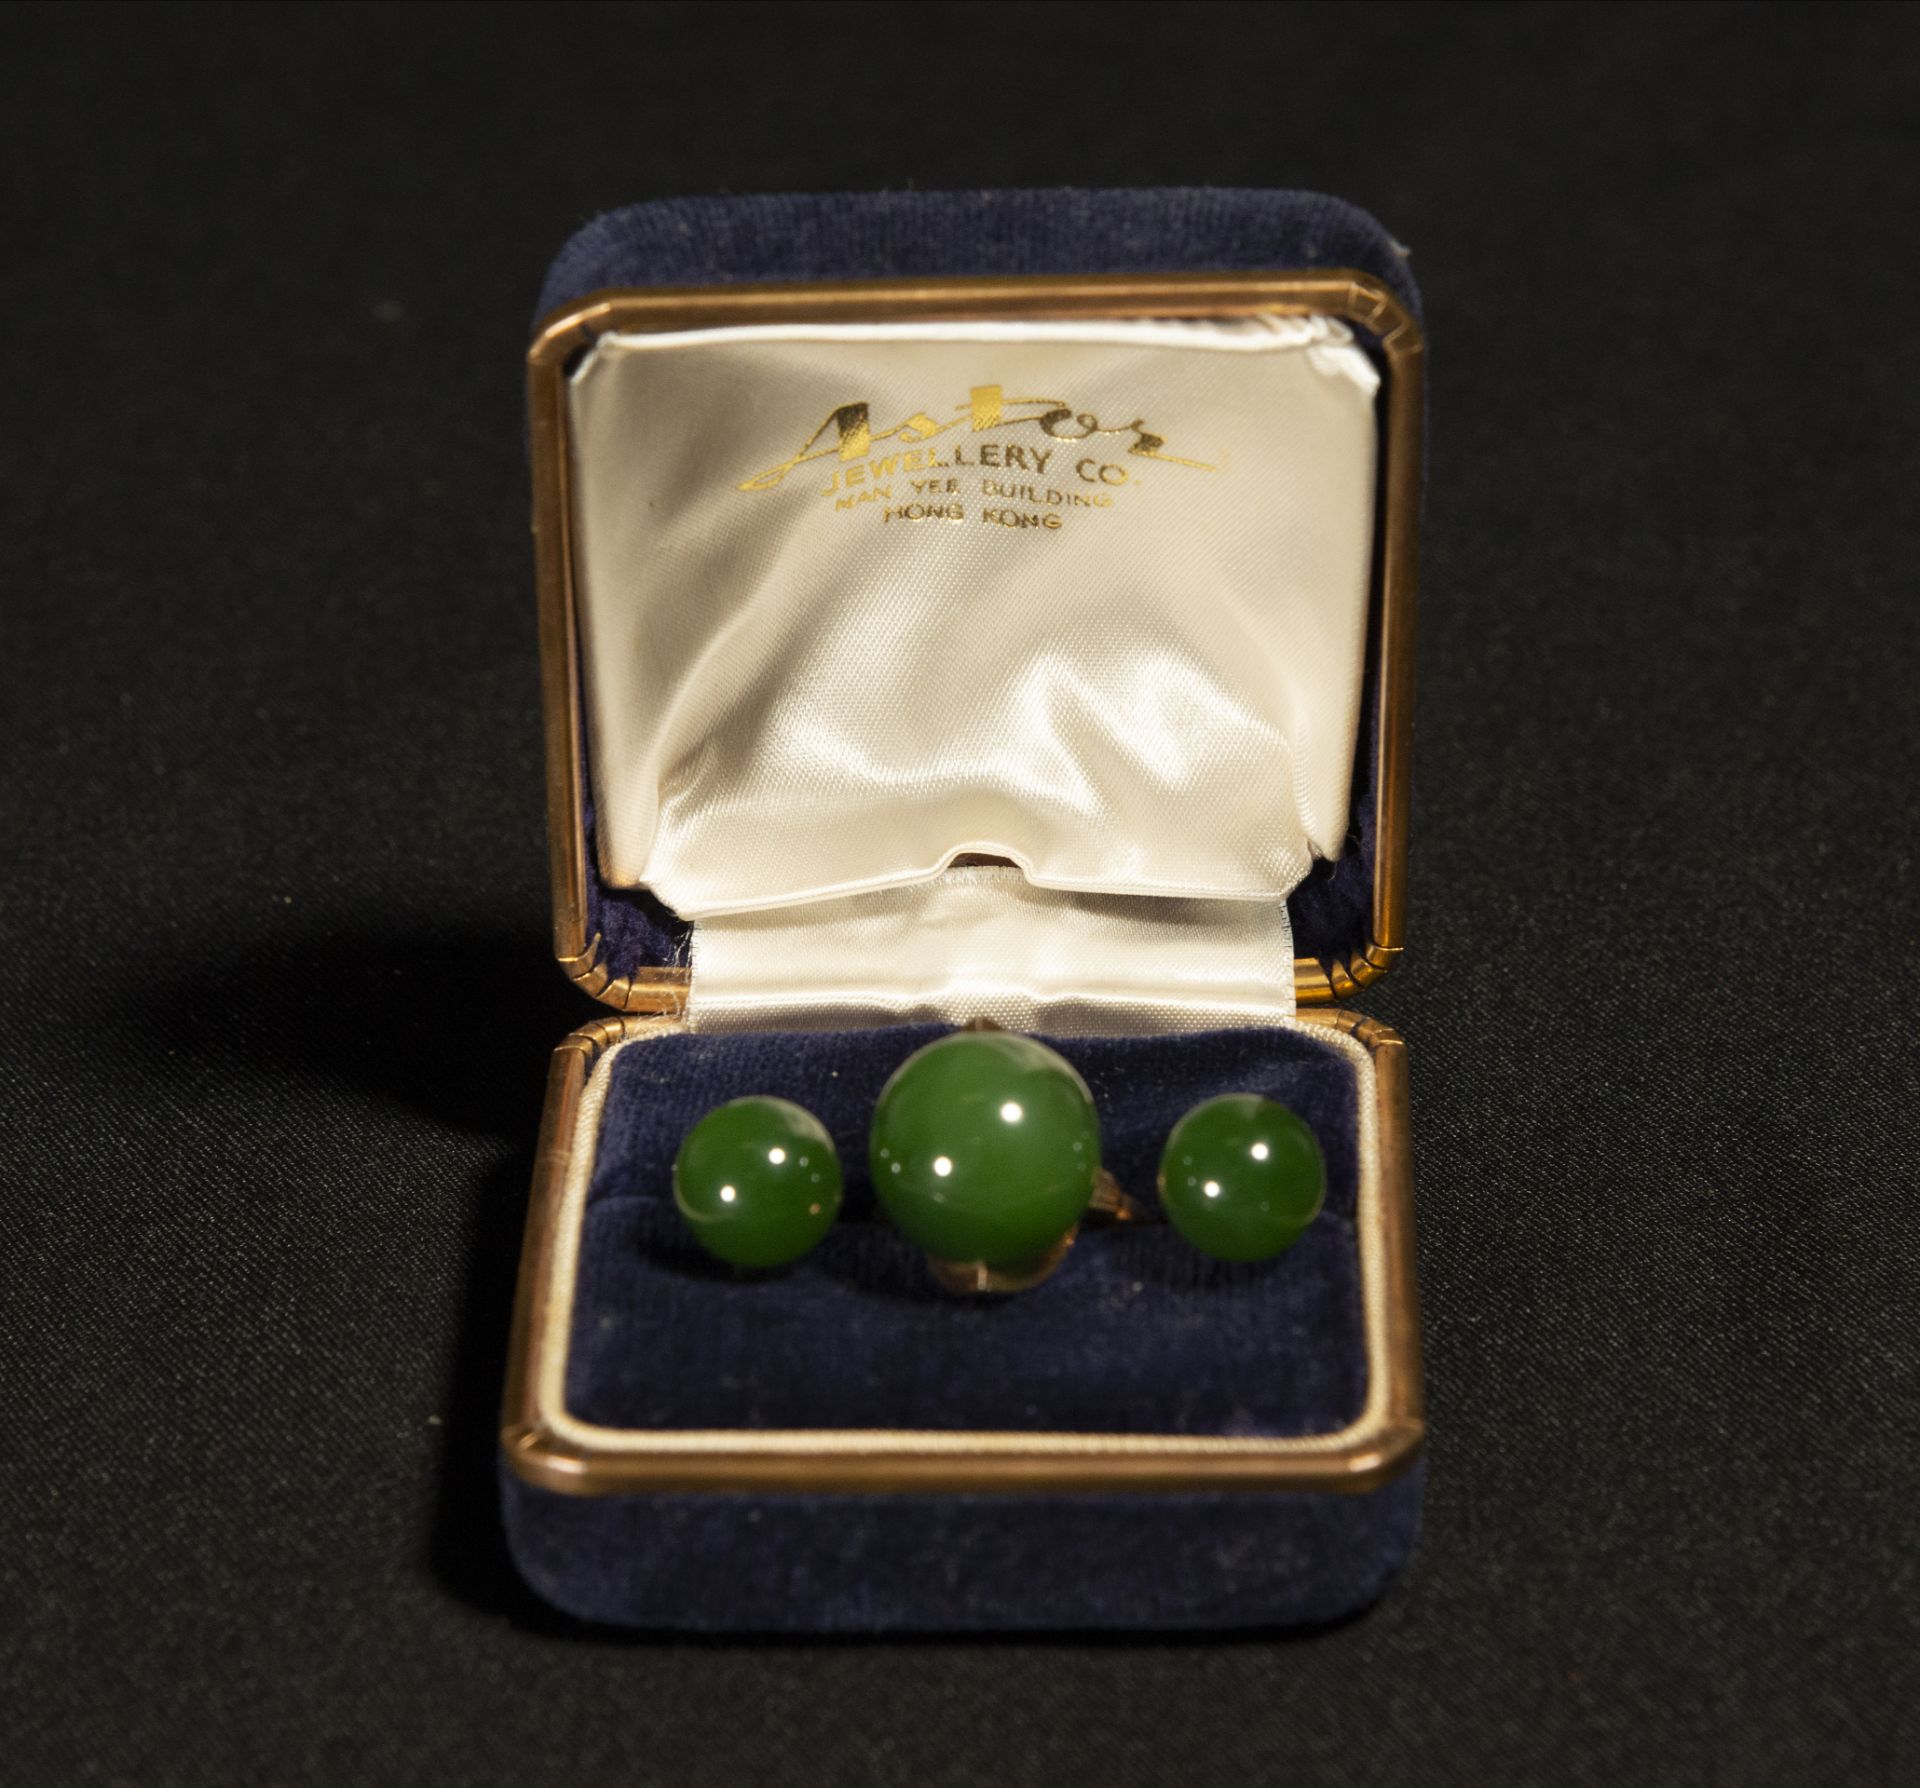 Beautiful set of ring and earrings in spinach green Chinese jade mounted in 18k gold